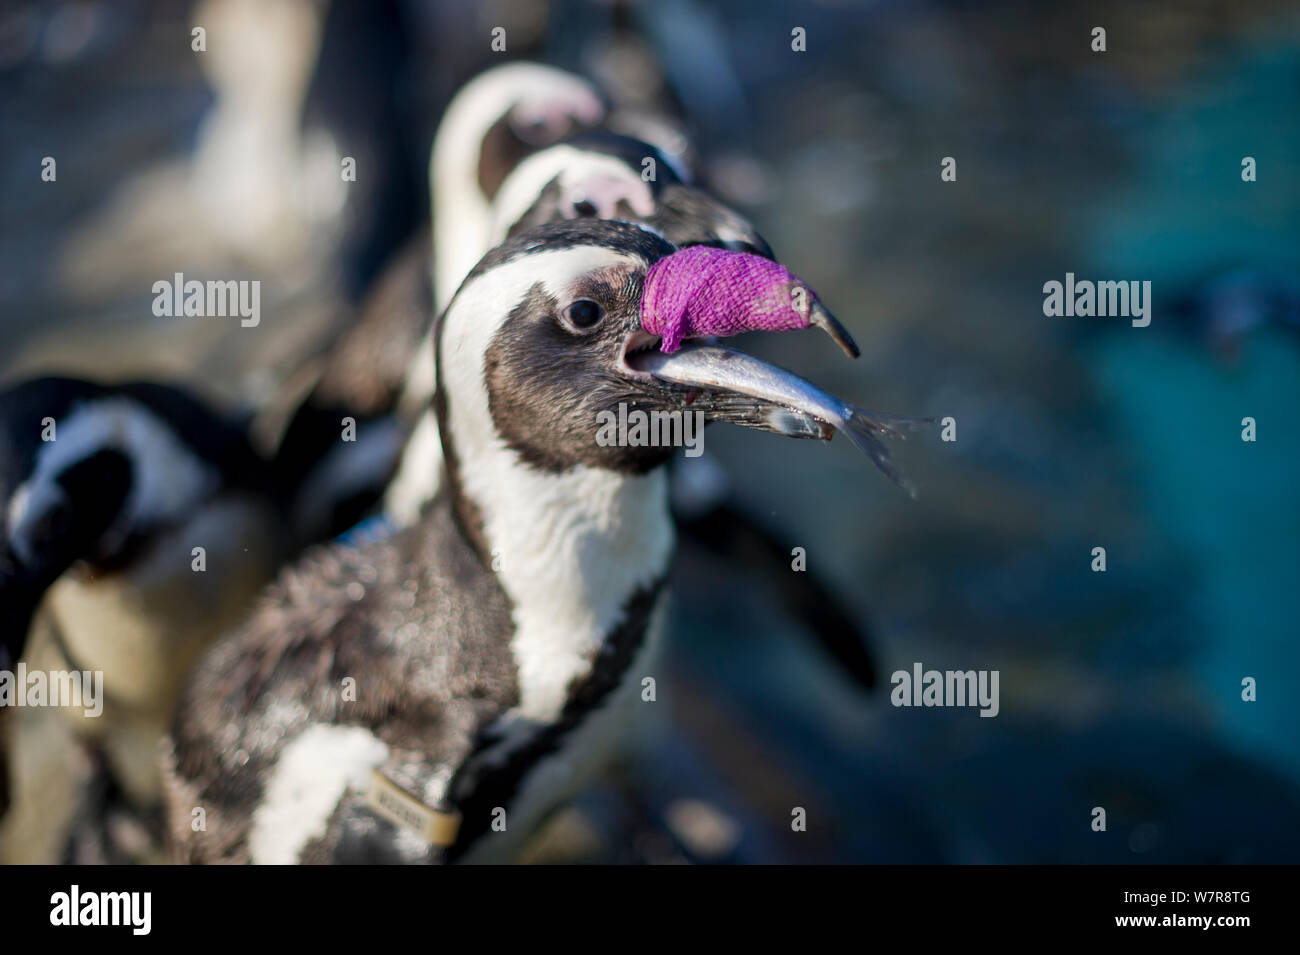 African penguin (Spheniscus demersus) with purple bandage round its injured beak feeding on fish, Southern African Foundation for the Conservation of Coastal Birds (SANCCOB), South Africa May 2012 Stock Photo